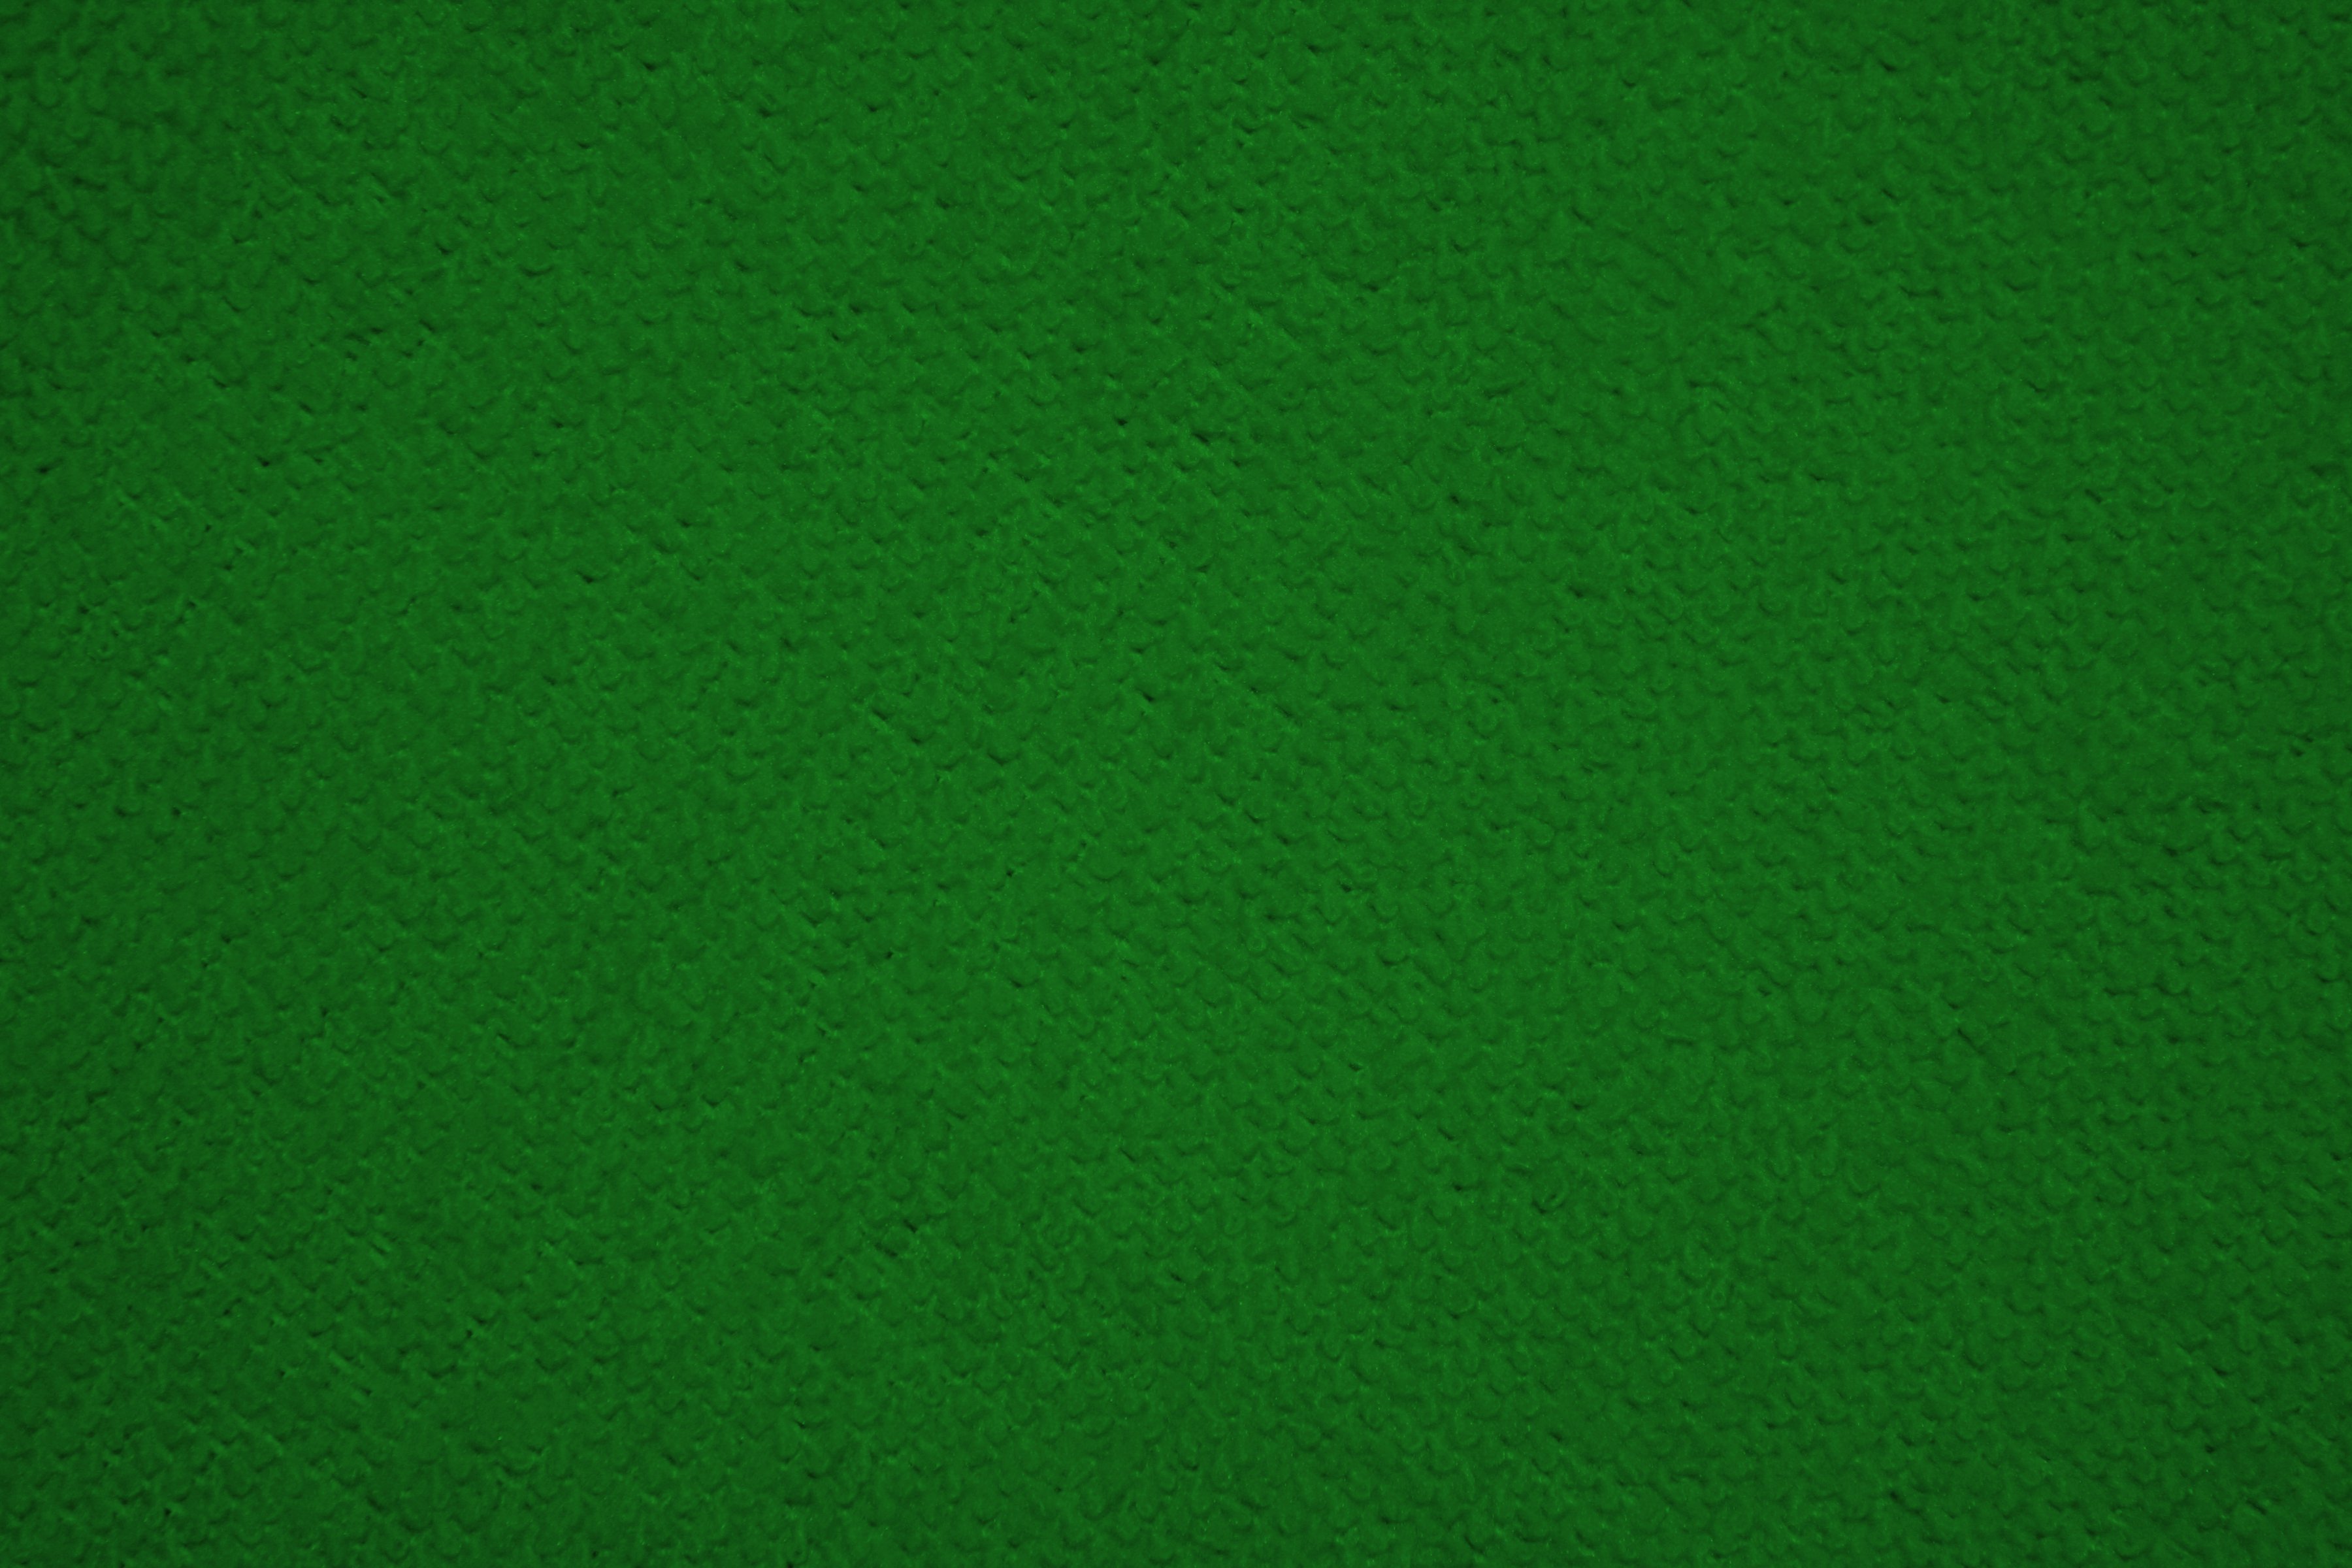 Kelly Green Microfiber Cloth Fabric Texture Picture Photograph 3600x2400